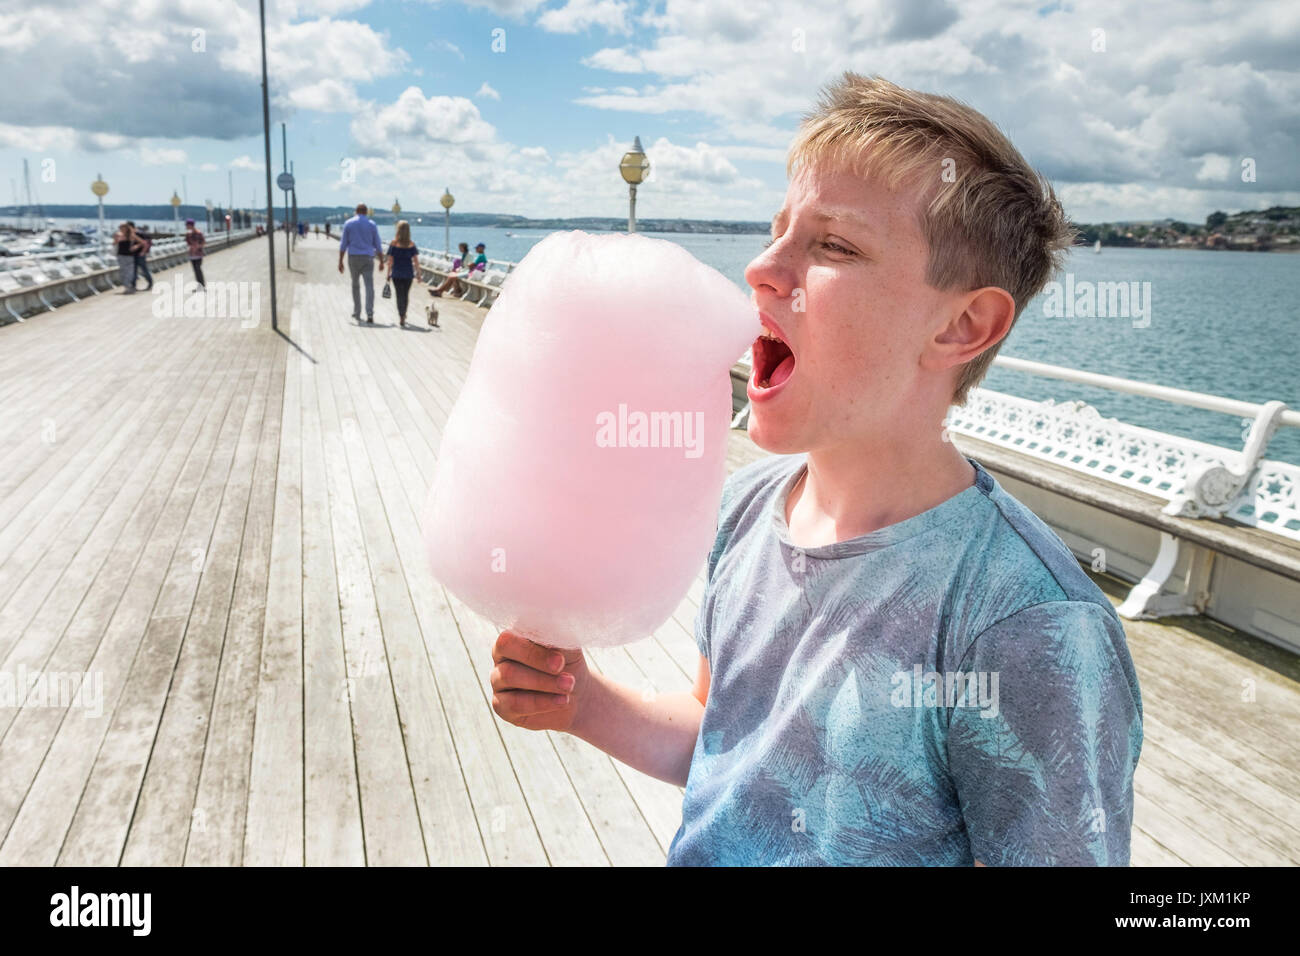 A tourist eating candy floss on Princess Pier in Torquay, Torbay, Devon, UK Stock Photo